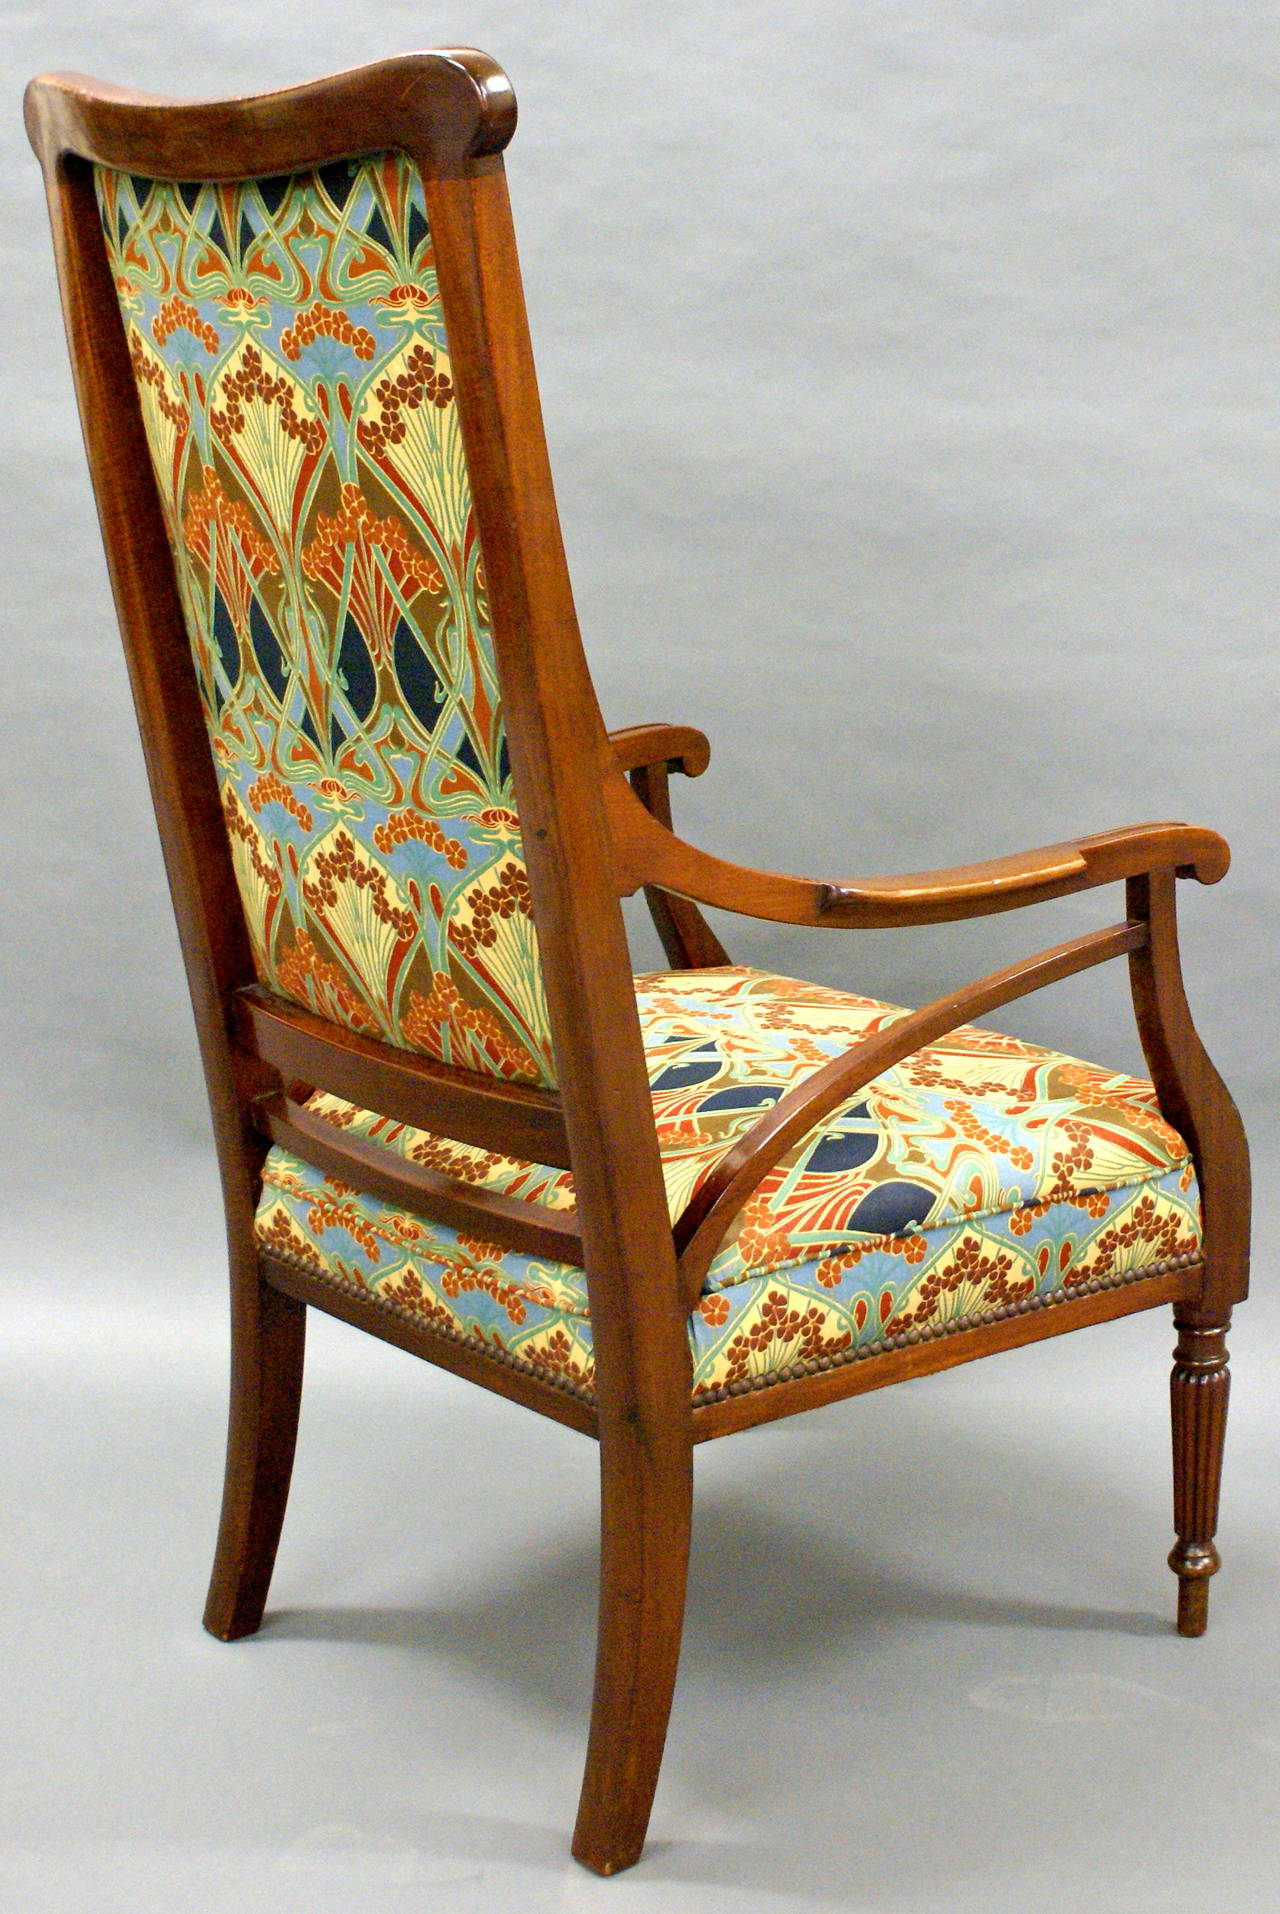 English Art Nouveau Armchair with Liberty's Fabric Upholstery